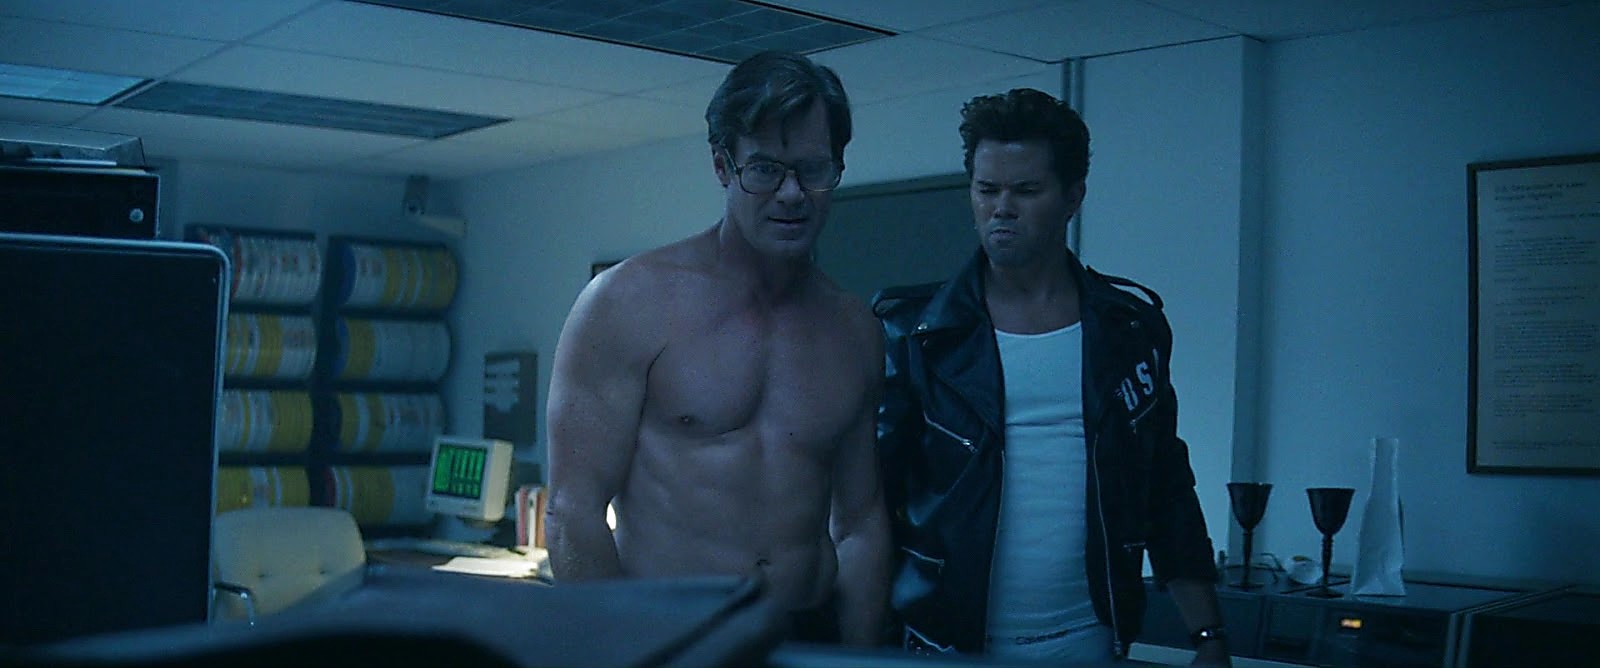 Andrew Rannells sexy shirtless scene June 28, 2020, 3pm